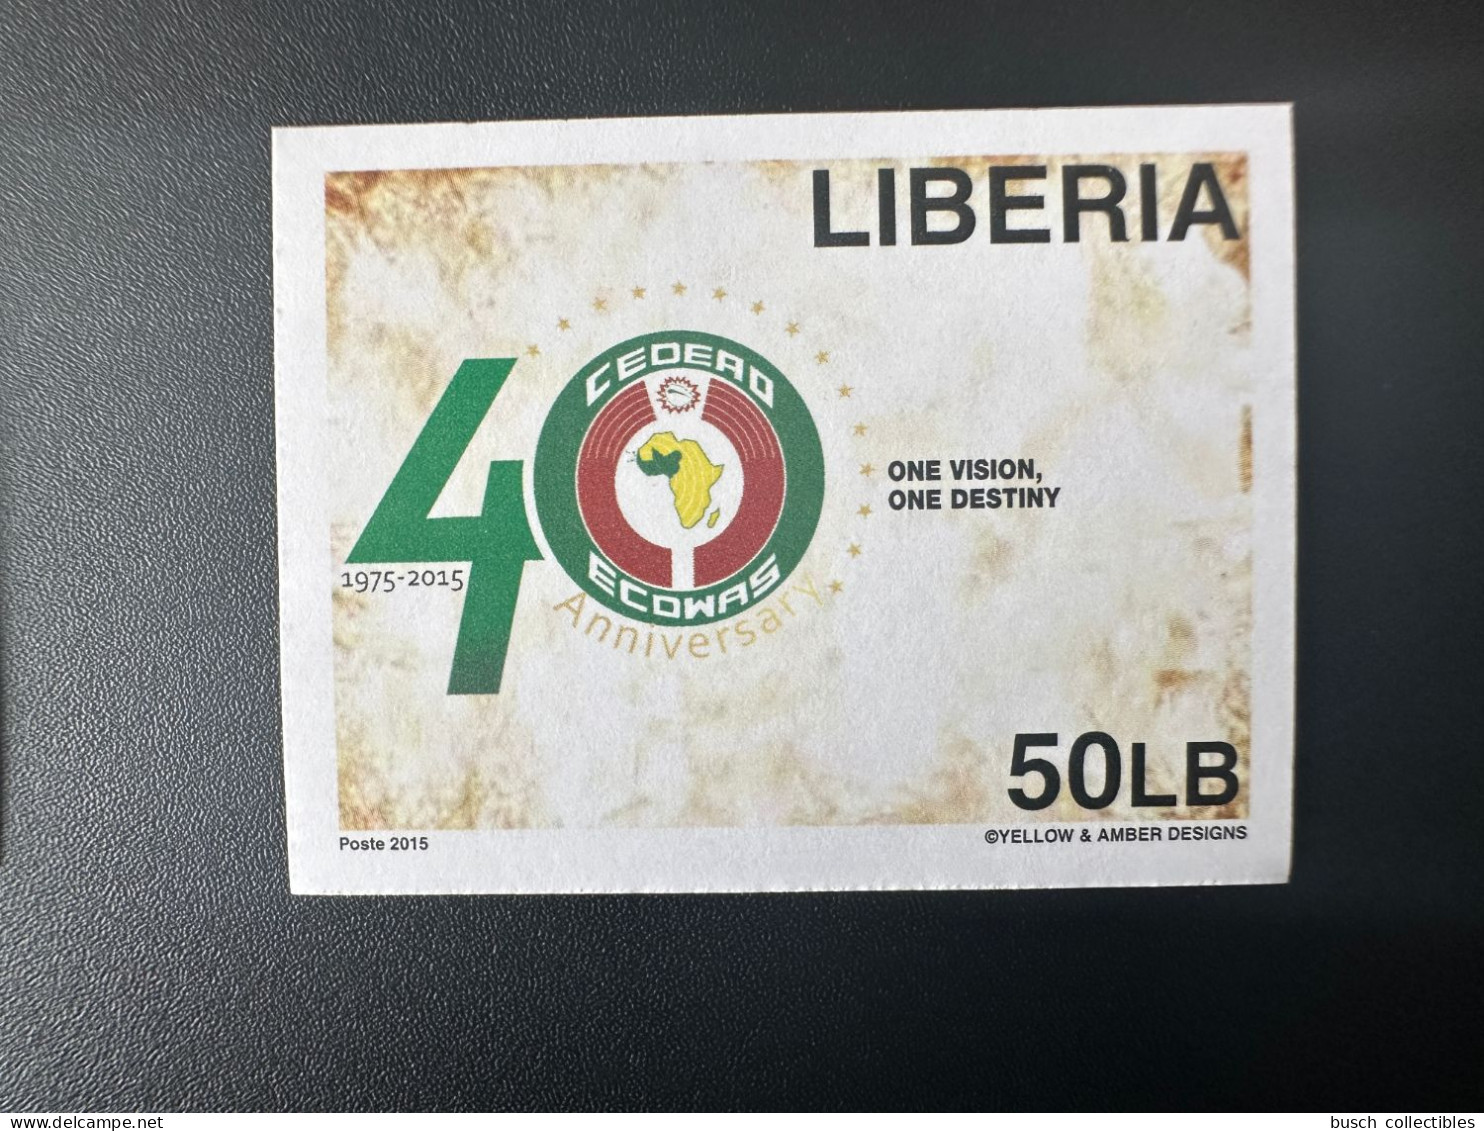 Liberia 2015 ND Imperf Emission Commune Joint Issue CEDEAO ECOWAS 40 Ans 40 Years - Emissioni Congiunte